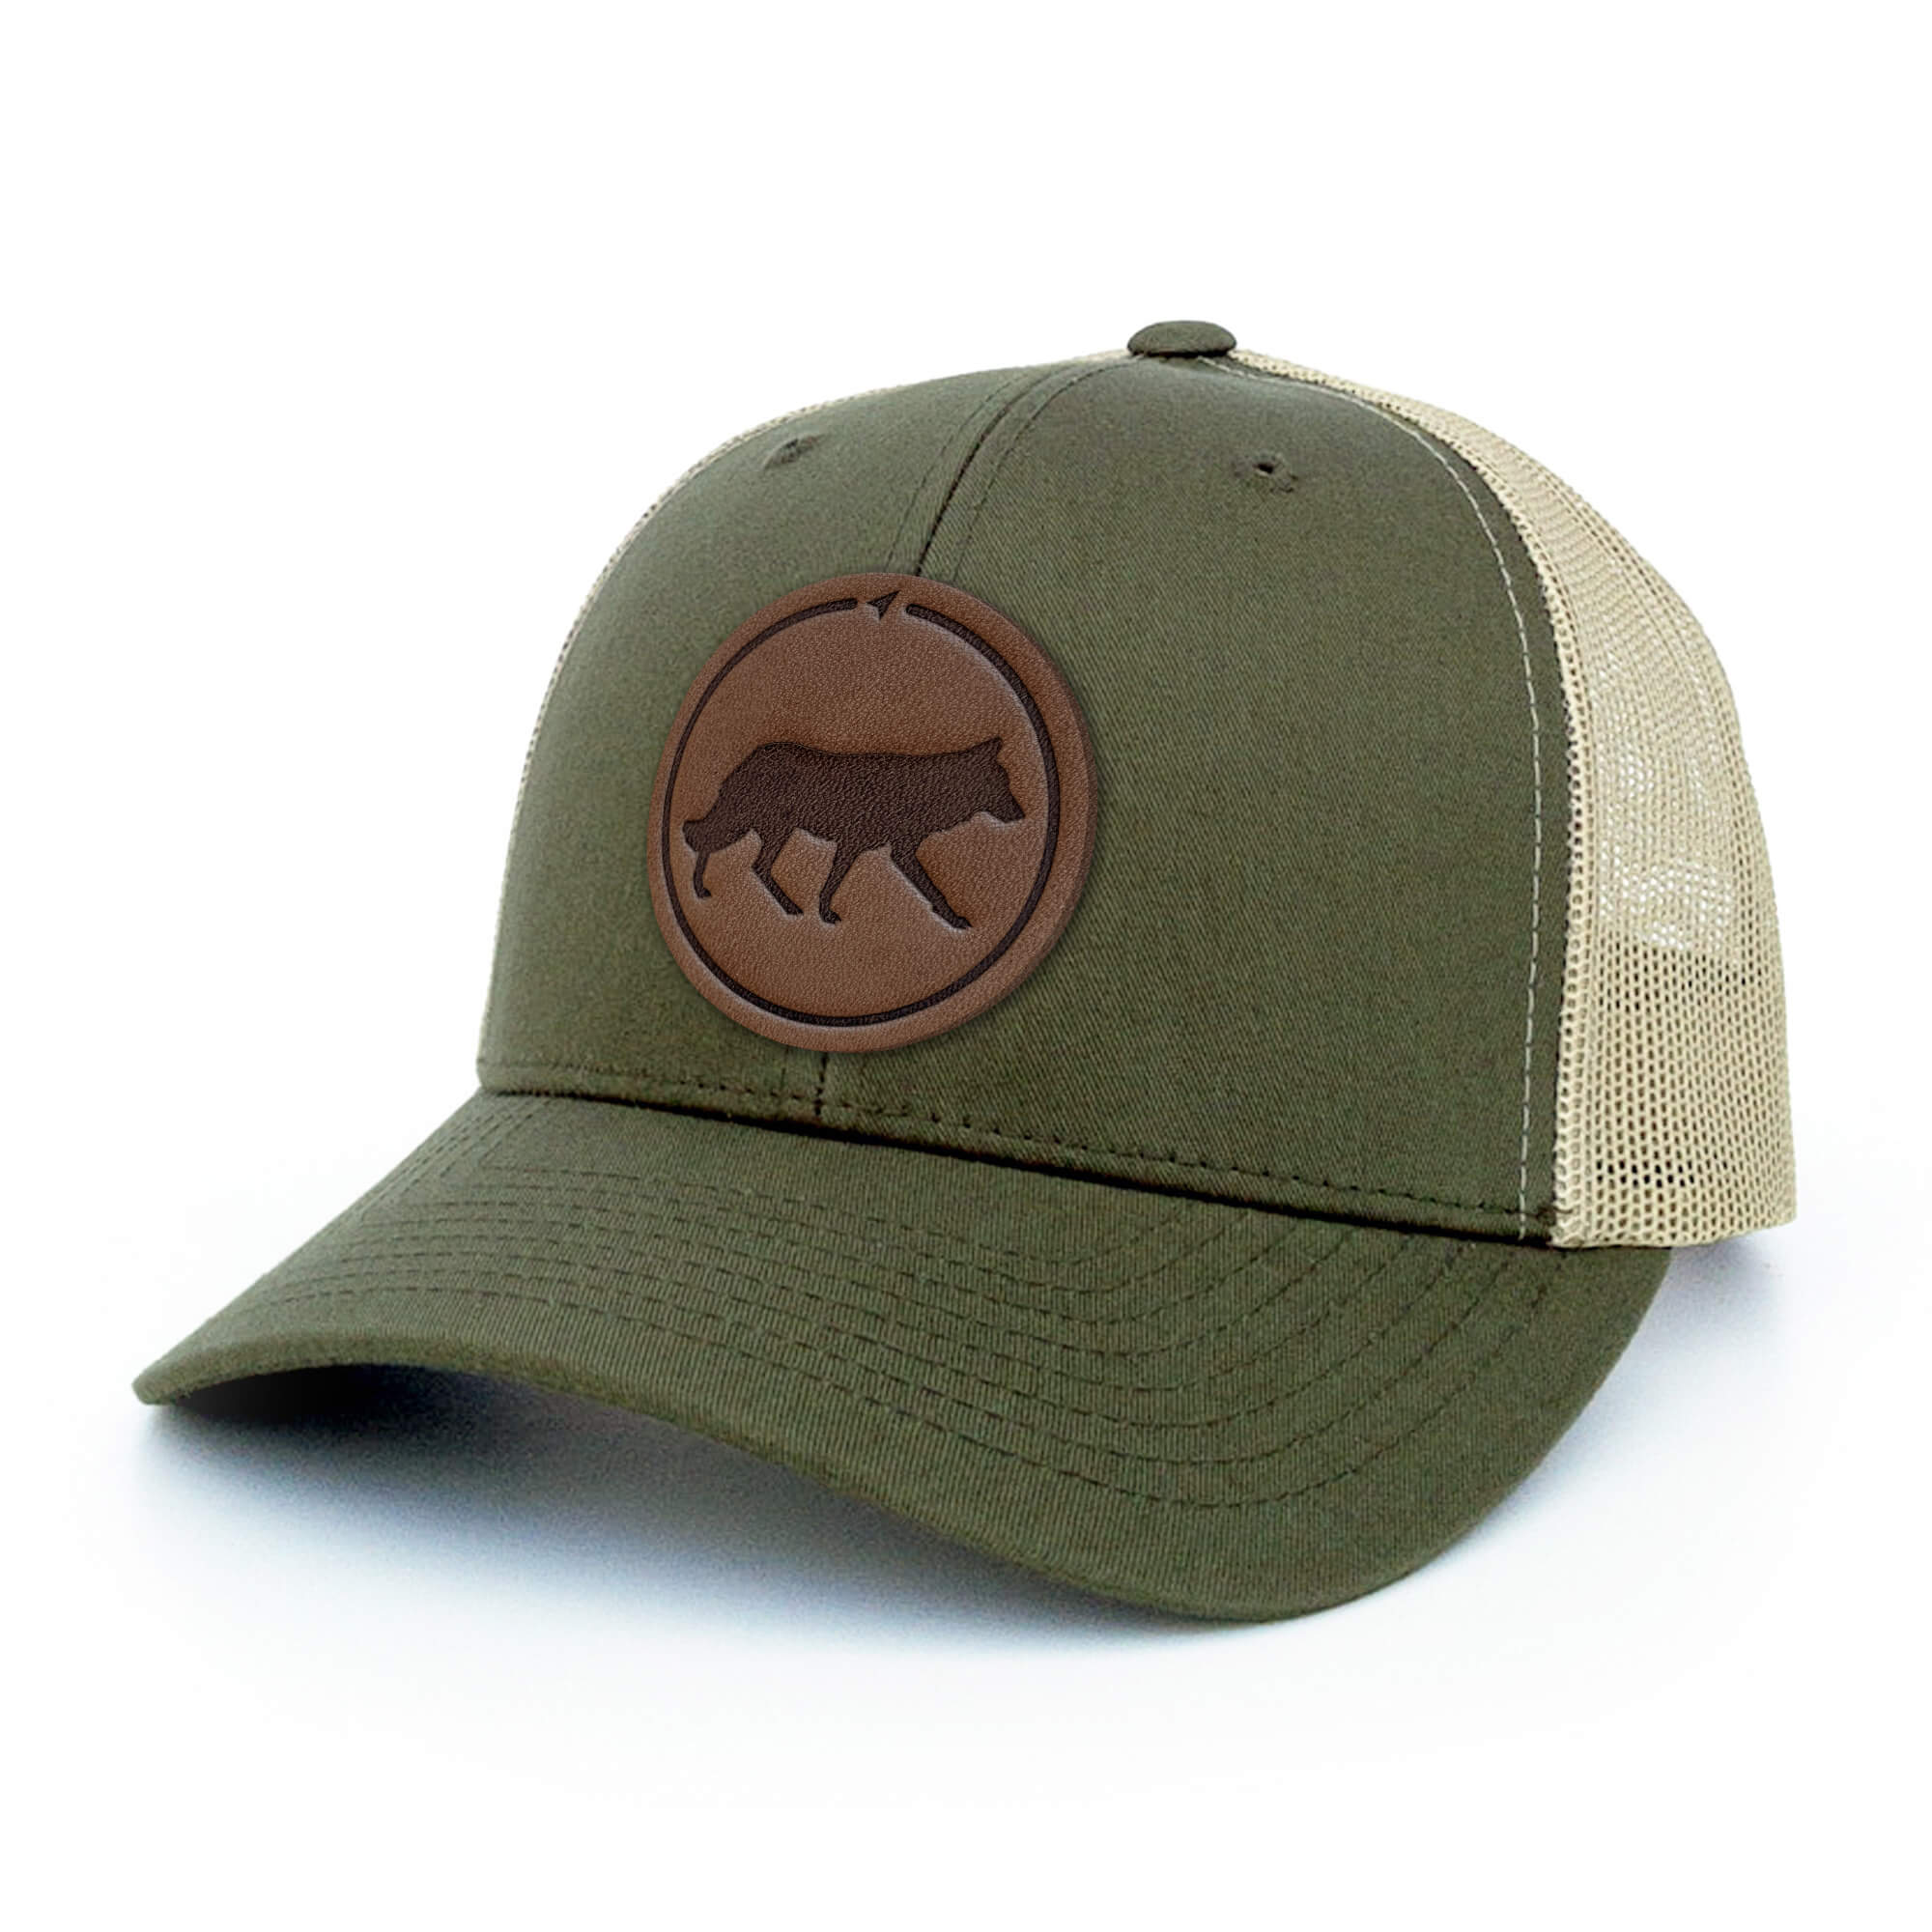 Moss and Khaki trucker hat with full-grain leather patch of Wolf | BLACK-004-007, CHARC-004-007, NAVY-004-007, HGREY-004-007, MOSS-004-007, BROWN-004-007  Edit alt text